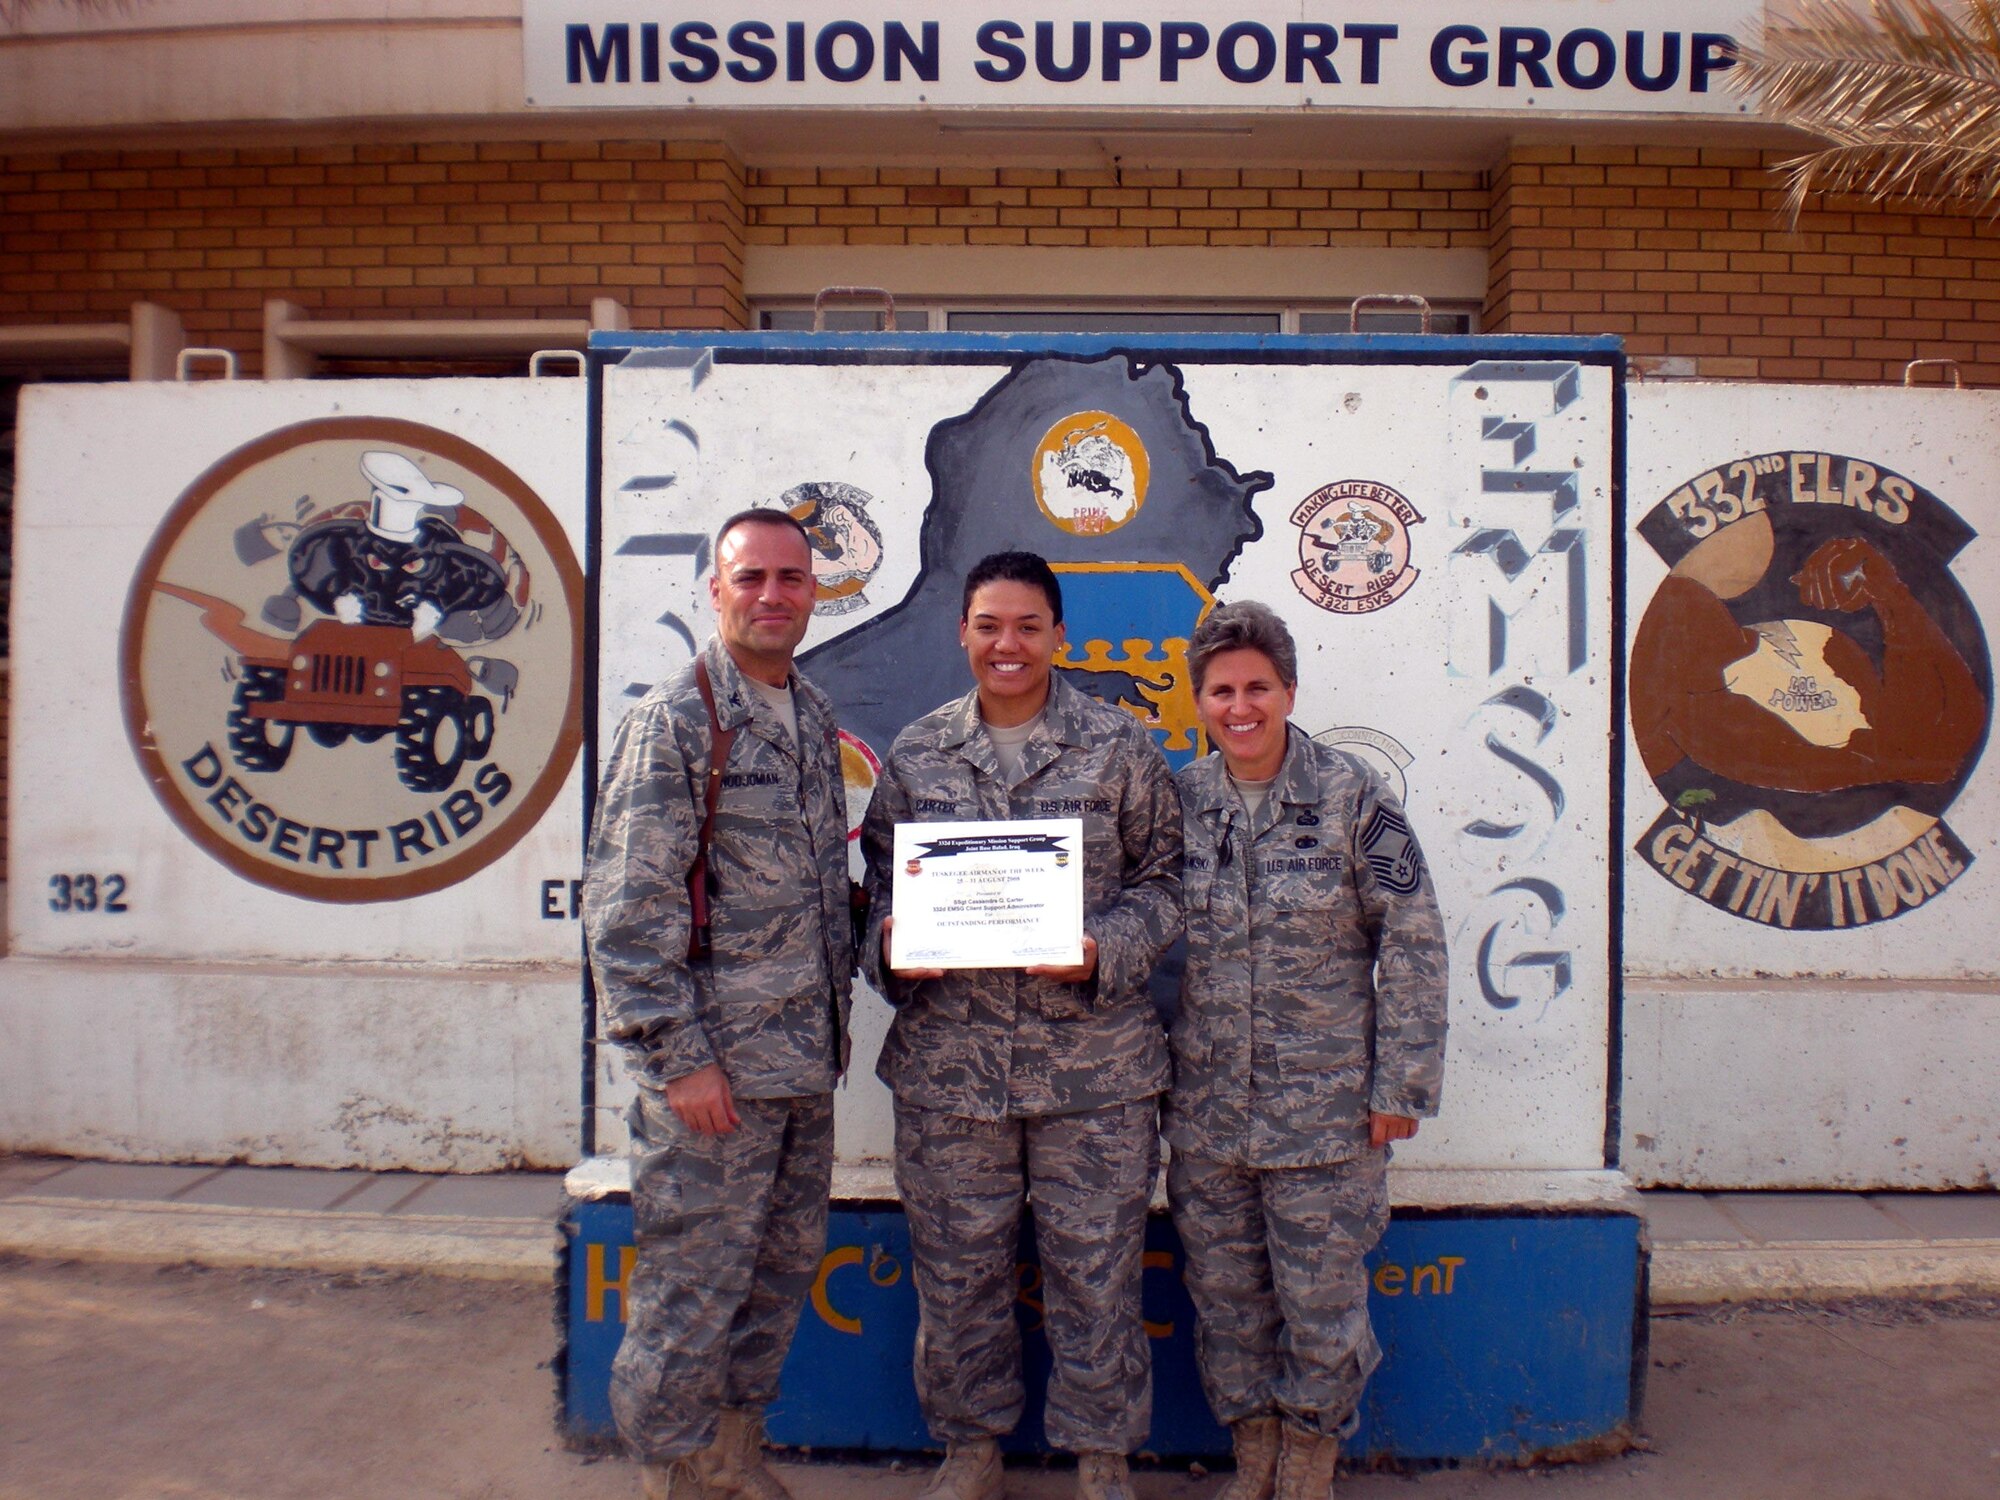 Staff Sergeant Cassandra Carter, 332nd Expeditionary Mission Support Group, Joint Base/Balad, Iraq, is presented the Tuskegee Airman of the Week award by Col. Sal Nodjomian (left) and Command Chief Master Sgt. Peri Rogowski. Sergeant Carter is assigned to the 934th Mission Support Group here.  (Courtesy photo)